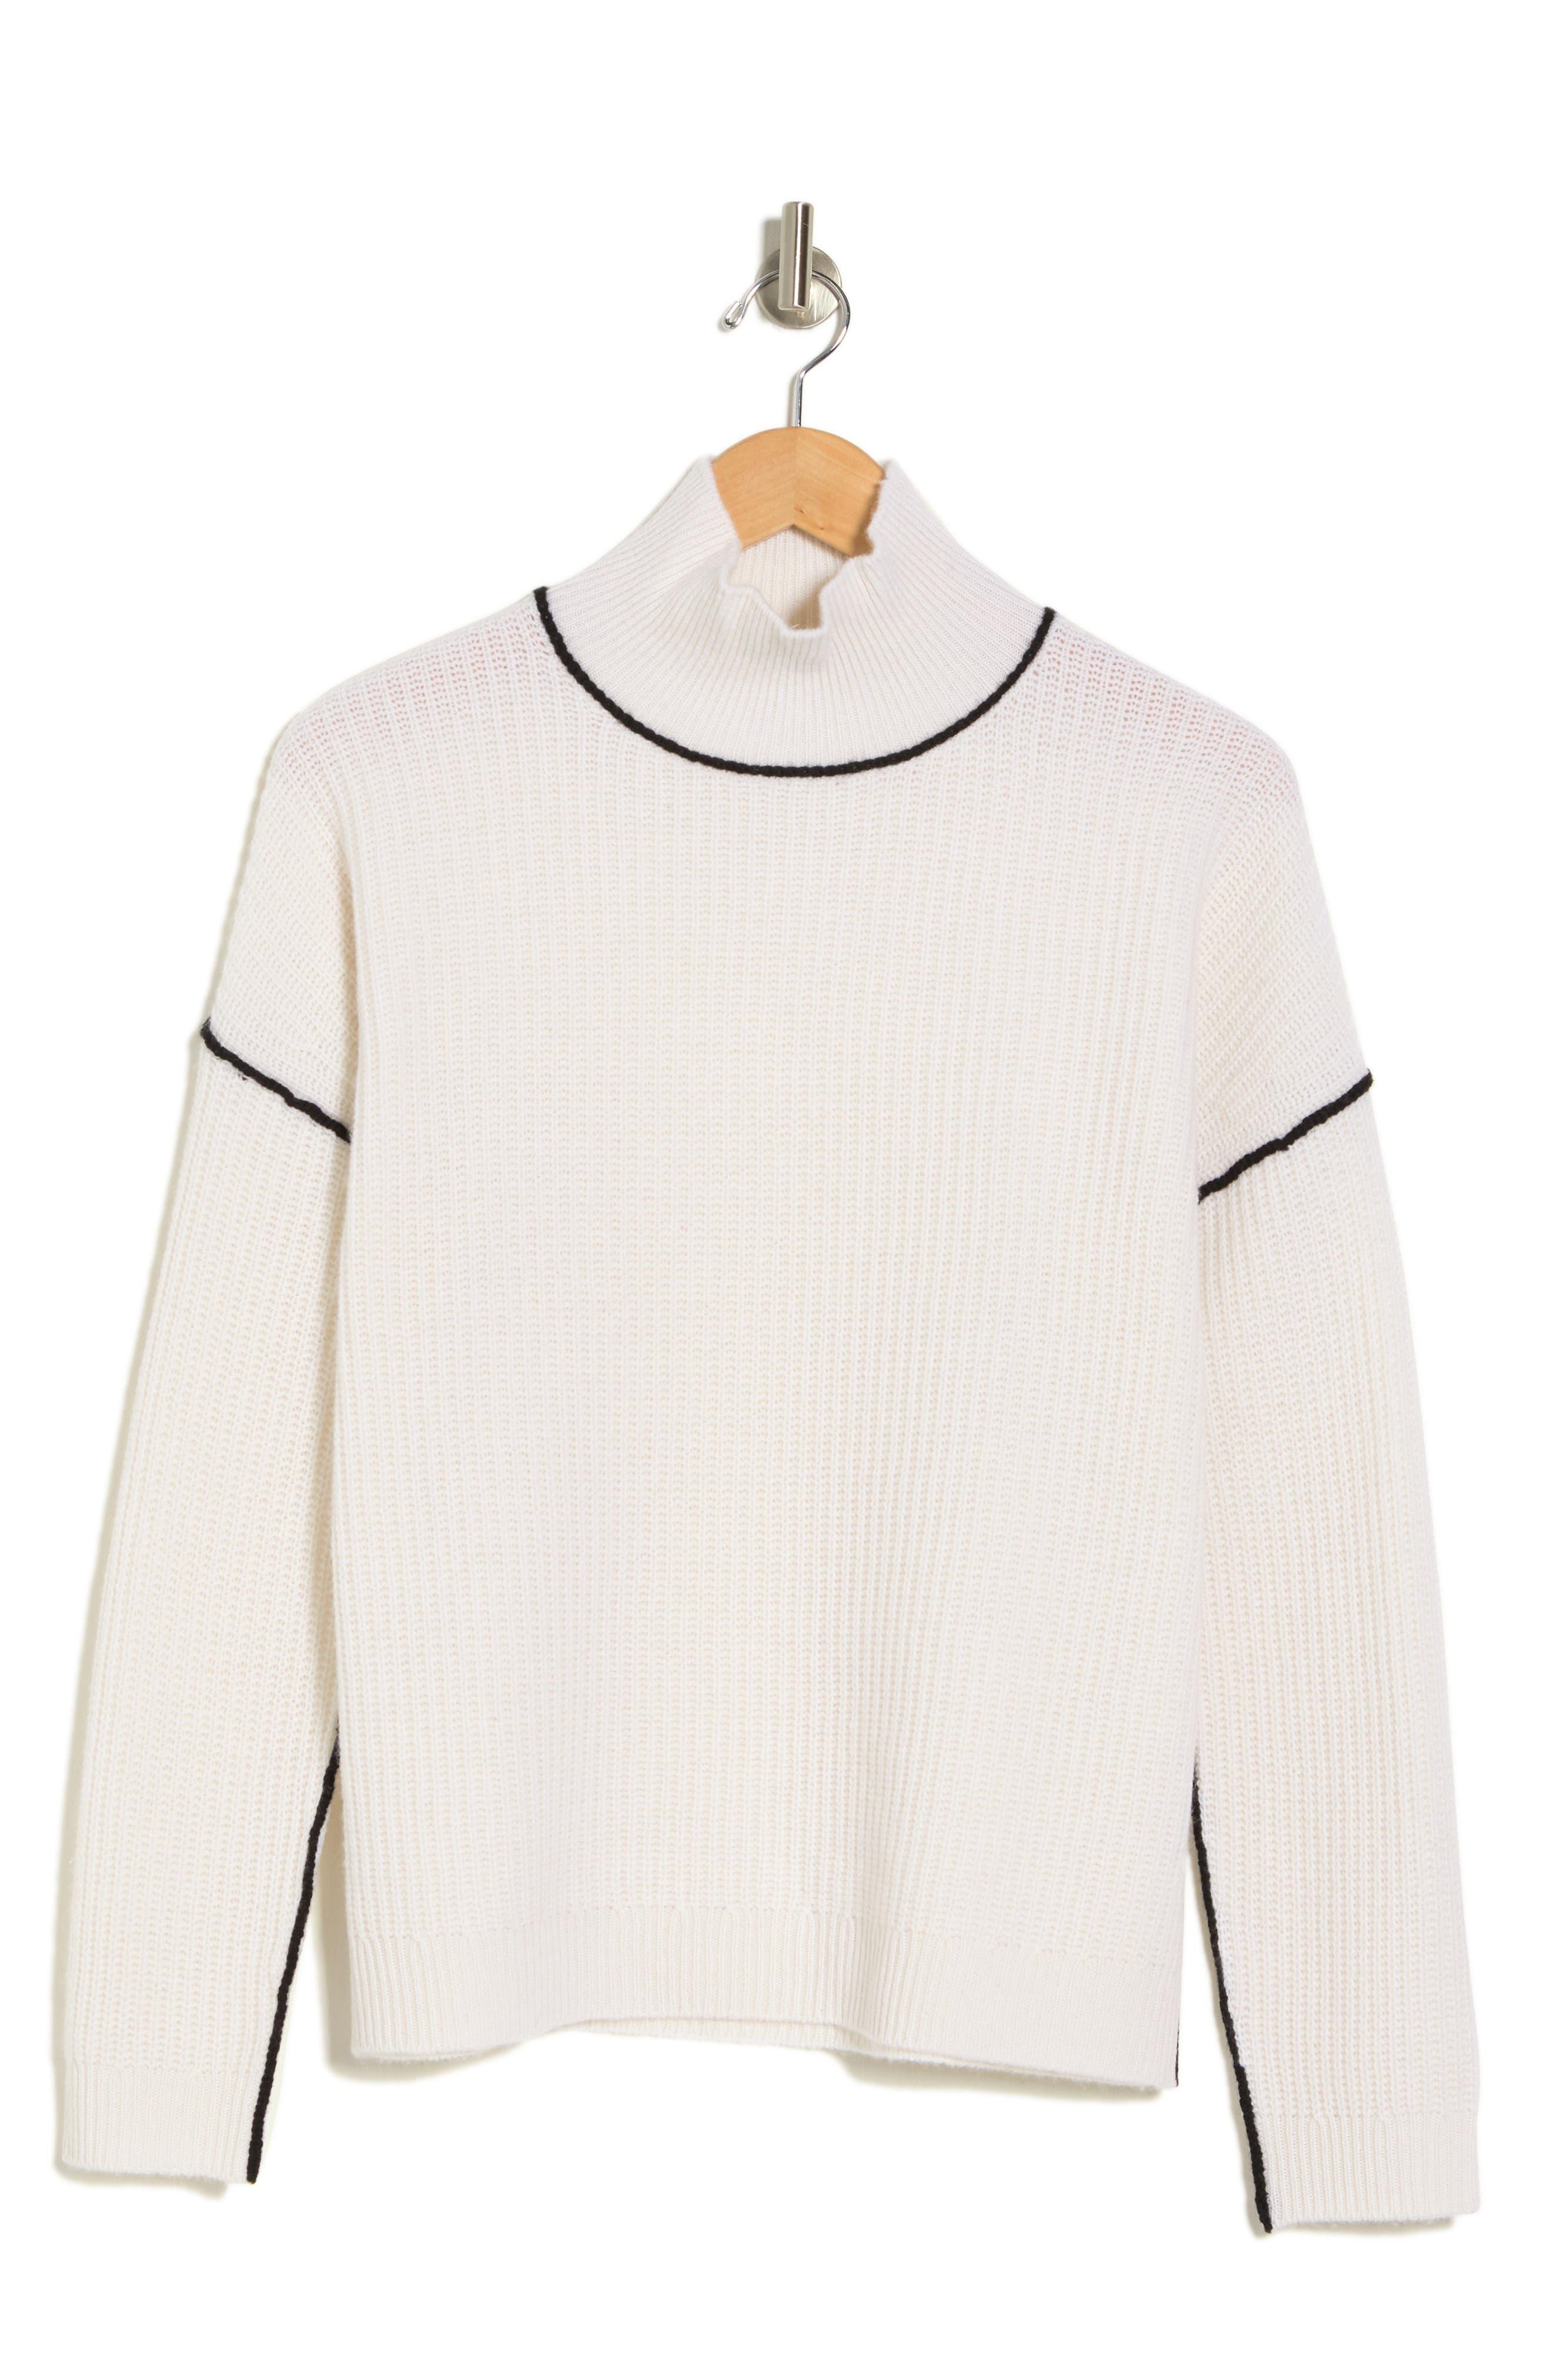 Magaschoni Mock Neck Cashmere Sweater in White | Lyst